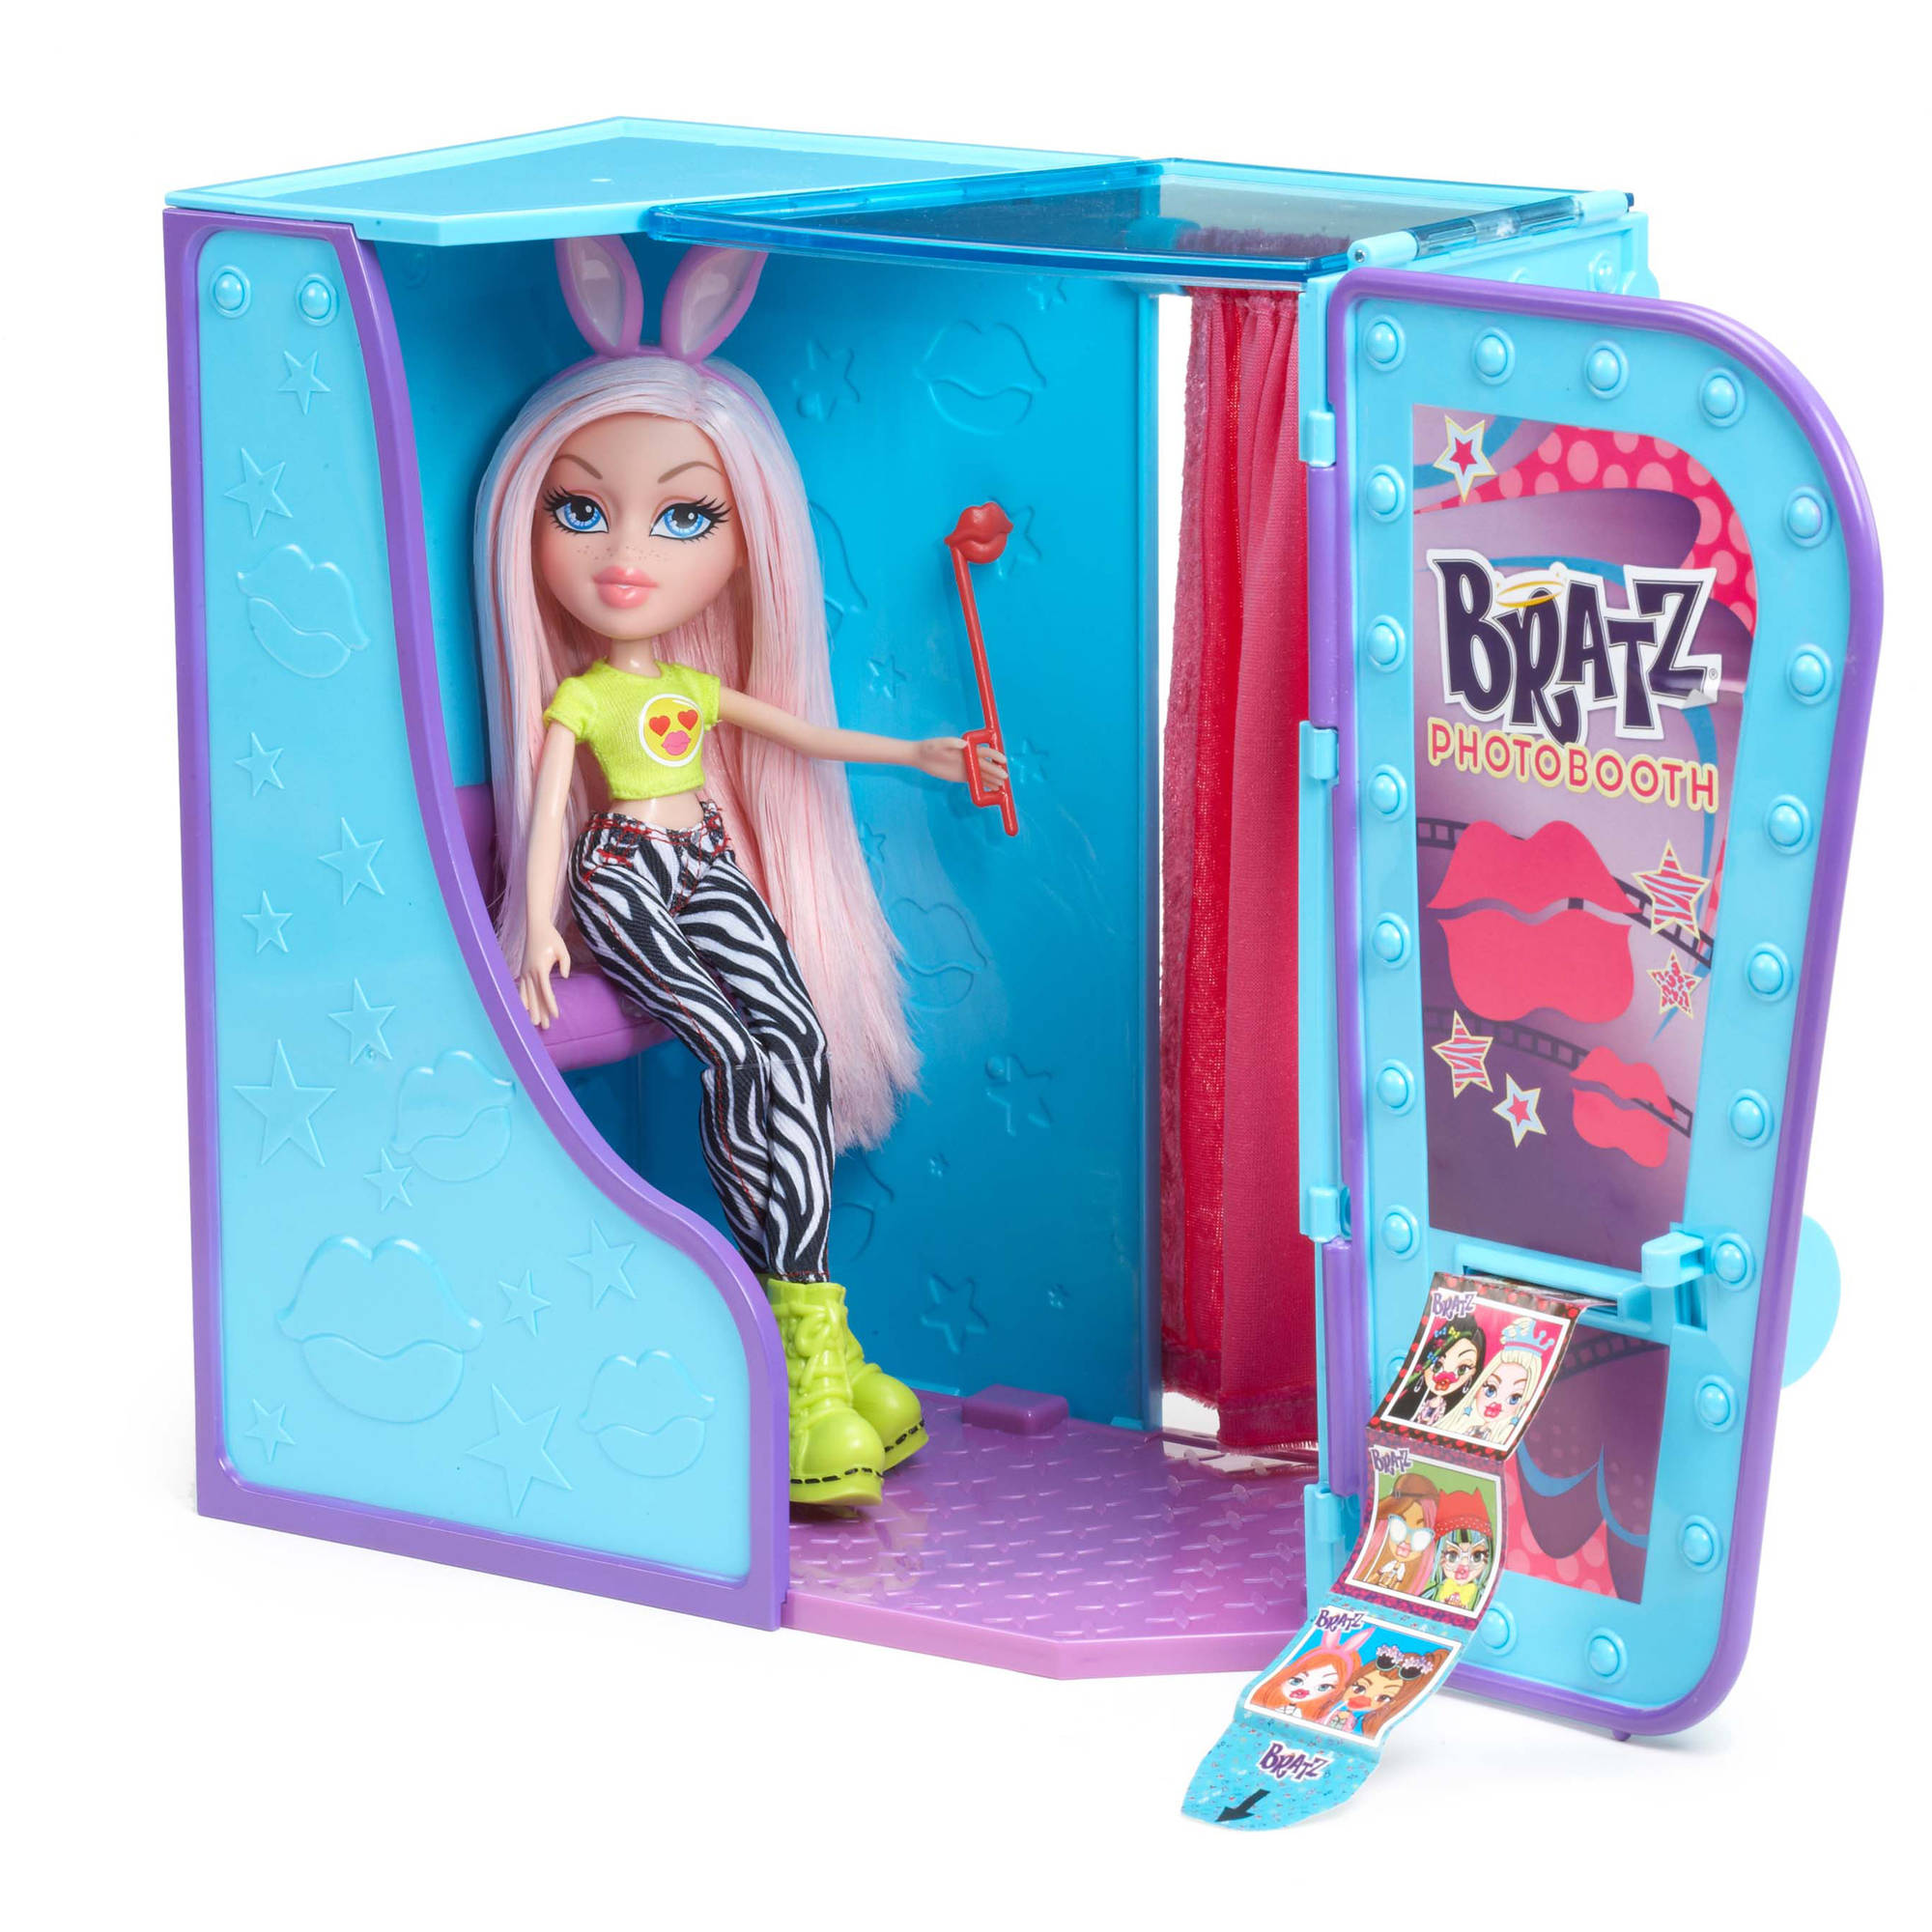 Bratz #SelfieSnaps Photobooth with Doll, Great Gift for Children Ages 6, 7, 8+ - image 1 of 5